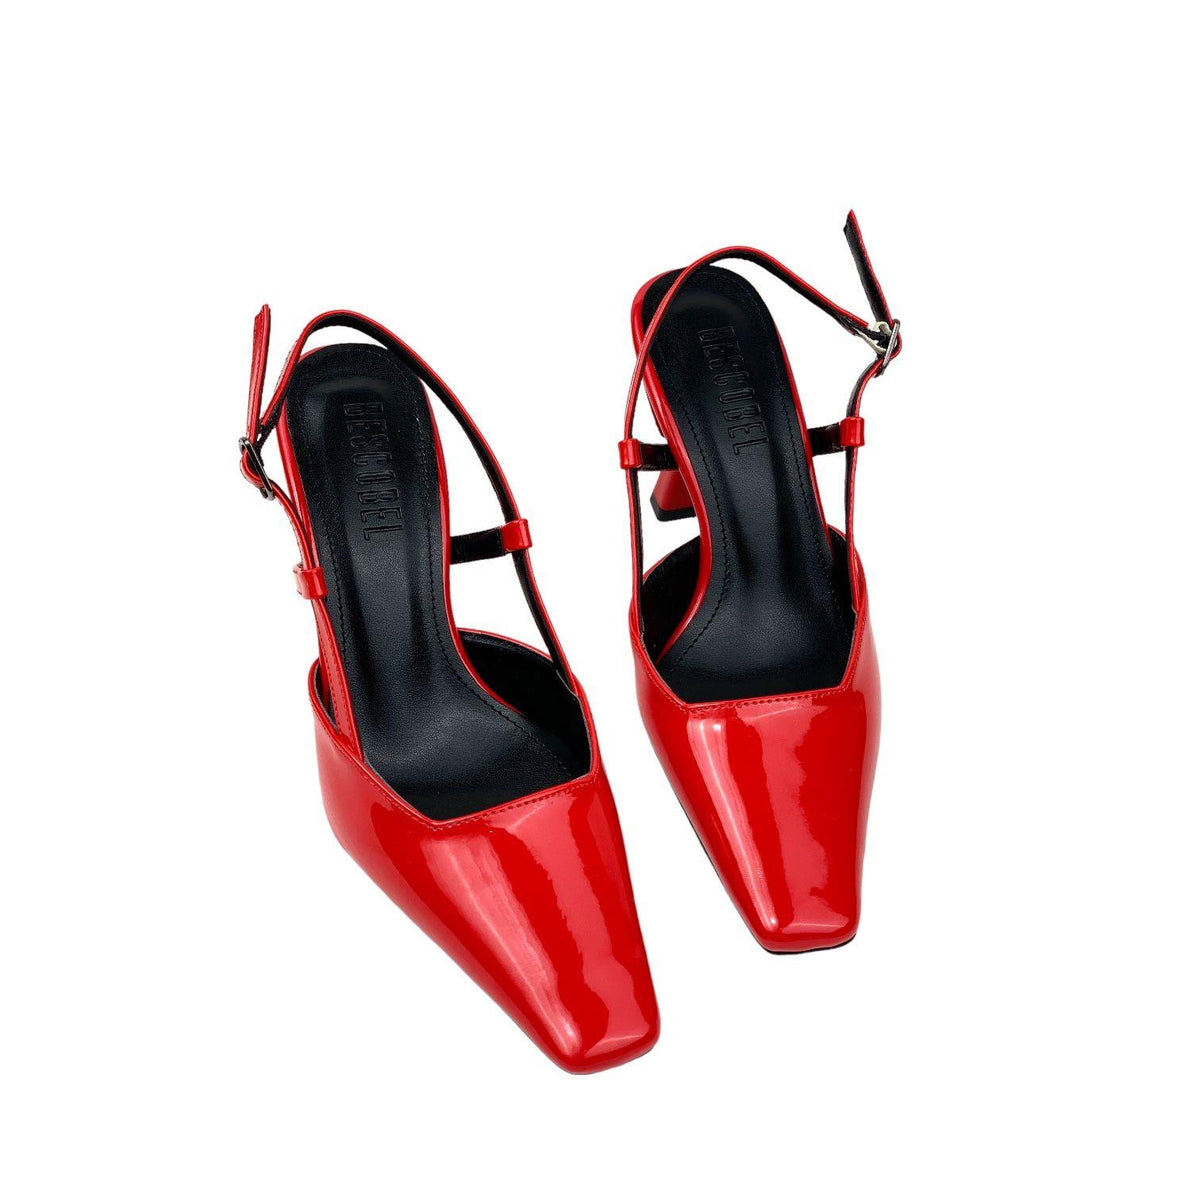 Women's Yojd Red Patent Leather Heeled Open Back Shoes 8 CM - STREETMODE ™